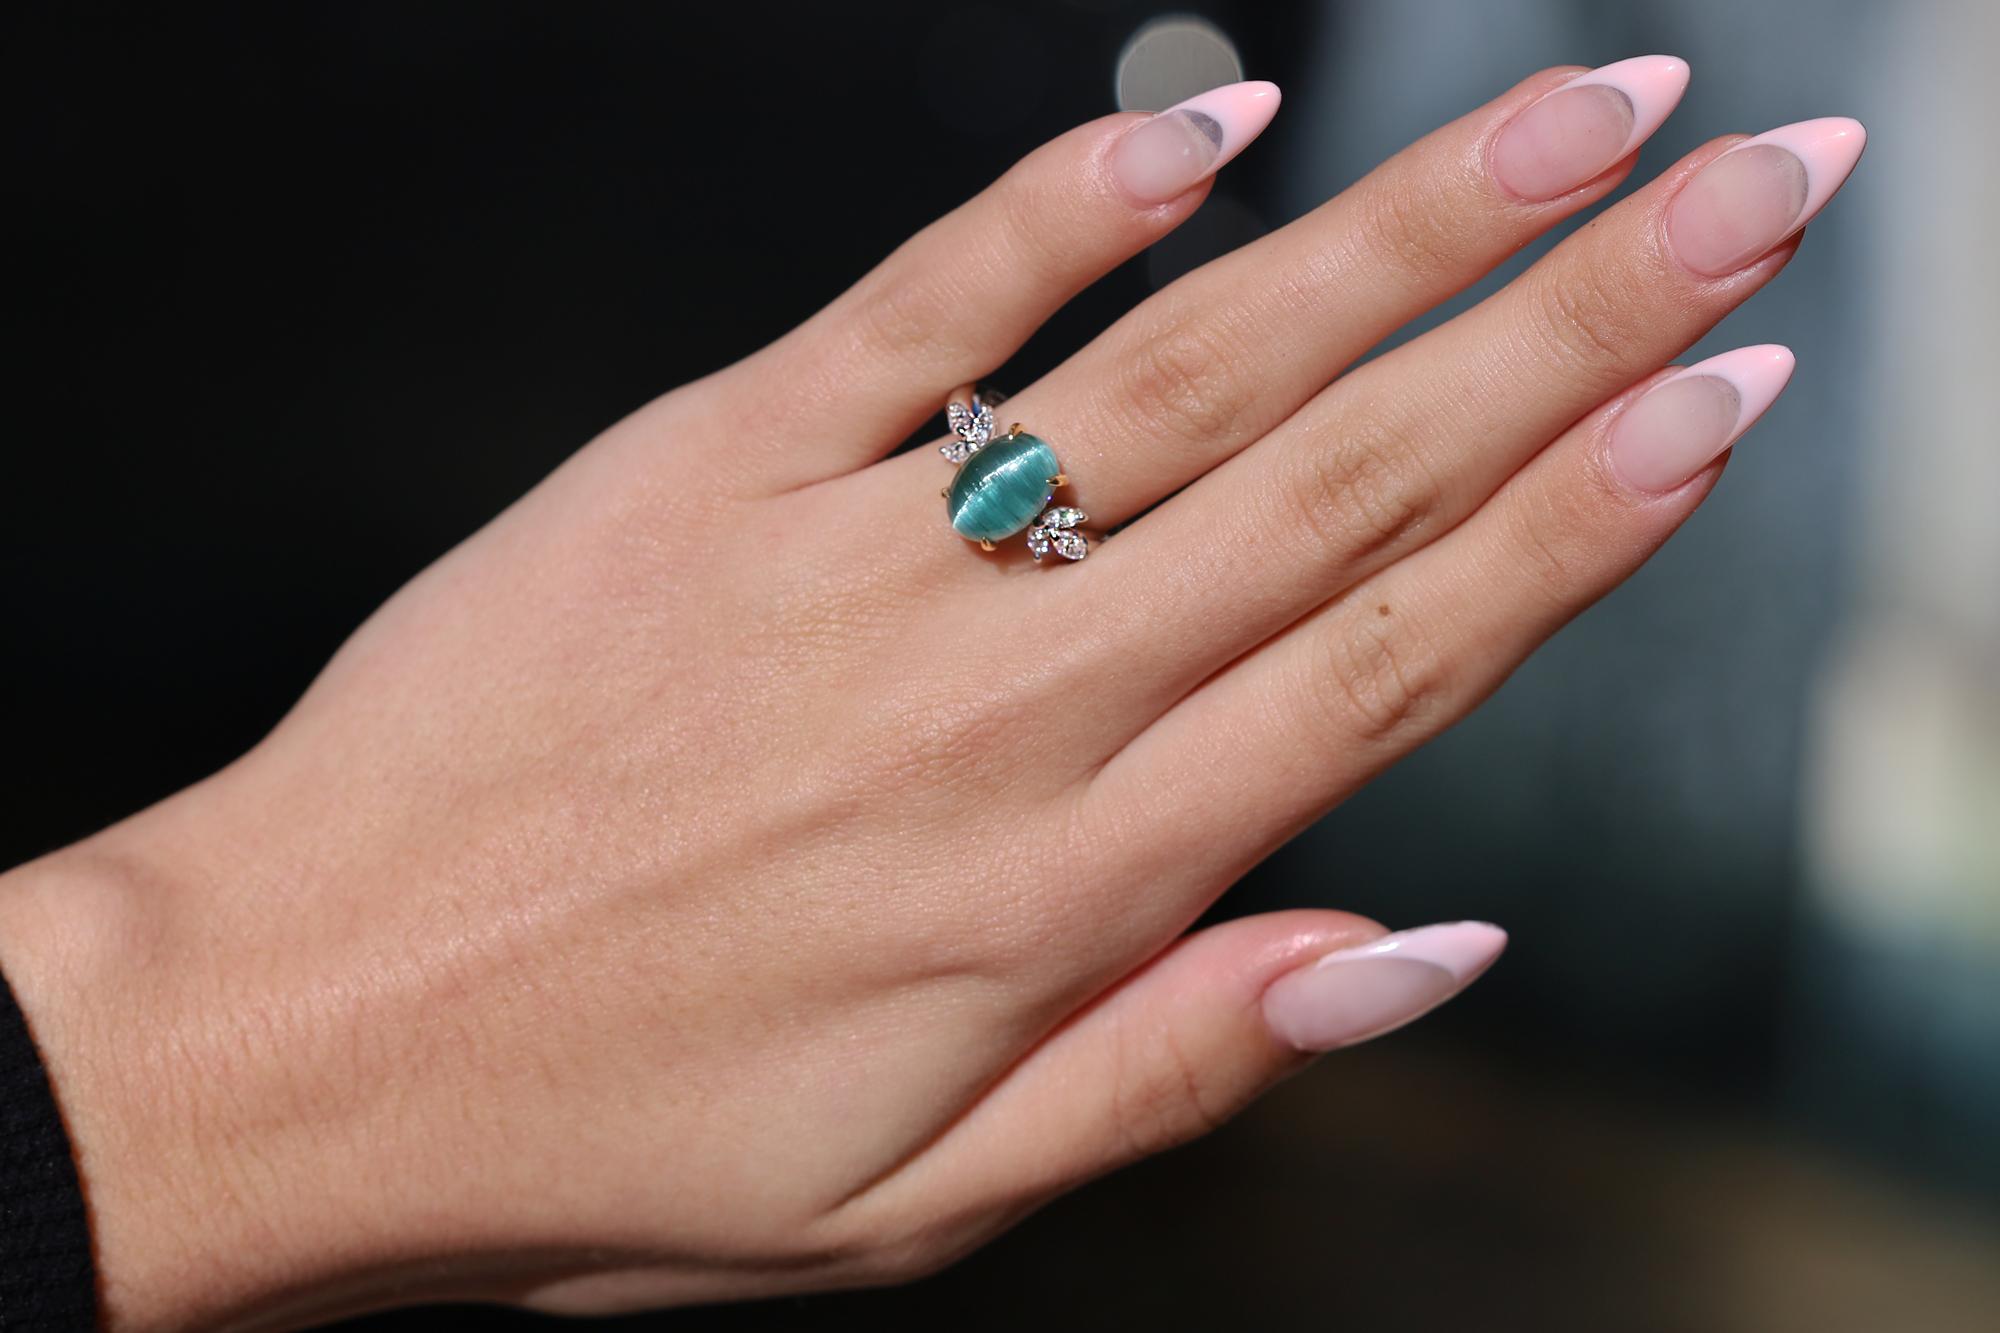 Centered by a scintillating, sparkling indicolite tourmaline, this Cat's Eye cocktail ring is a vintage stunner. The cabochon weighing 4 carats exhibiting a distinct 